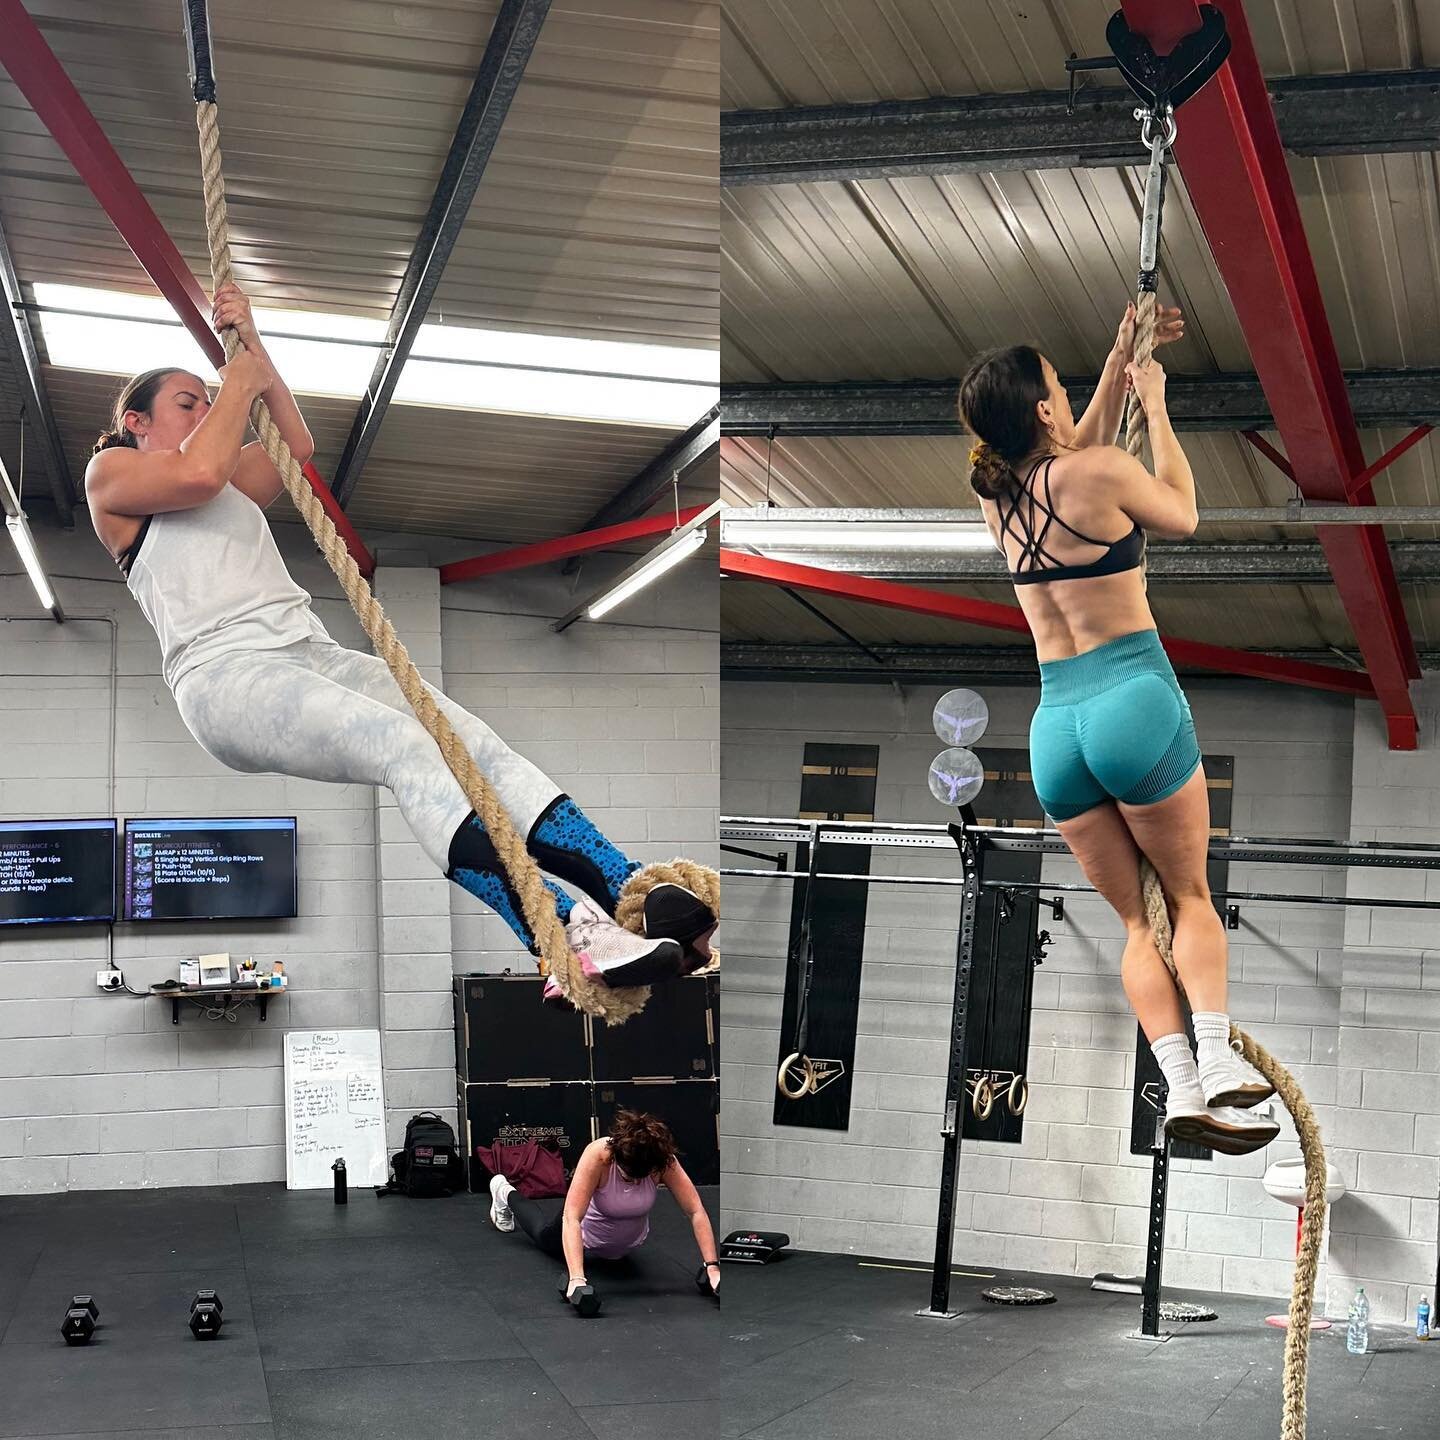 Rope Climbs
#crossfithuddersfield #cvfit #ropeclimbs #crossfituk #crossfit #fitness #gym #workout #fit #fitnessmotivation #training #bodybuilding #motivation #sport #fitfam #personaltrainer #wod #gymlife #lifestyle #weightlifting #muscle #health #pow